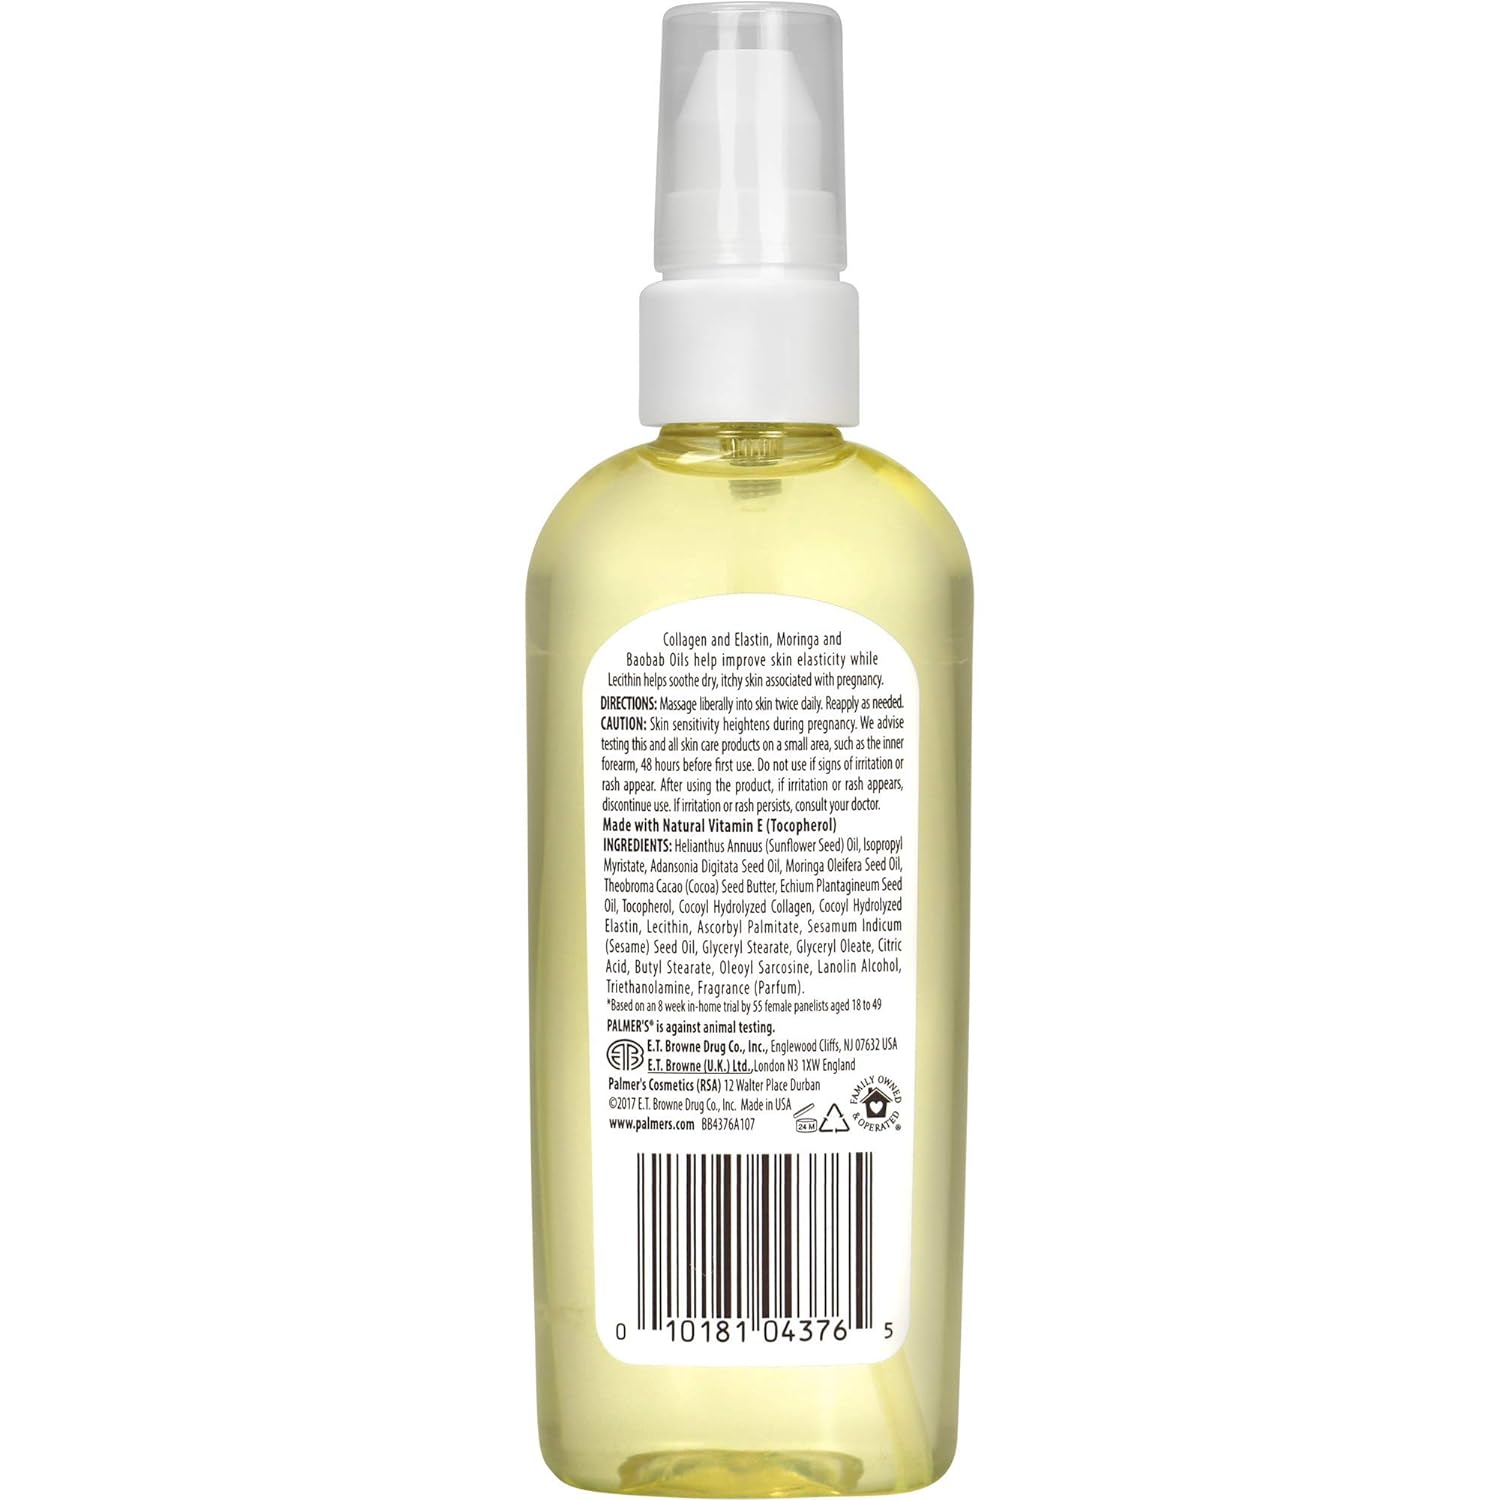 Palmer's Cocoa Butter Formula Massage Oil for Stretch Marks and Pregnancy Skin Care